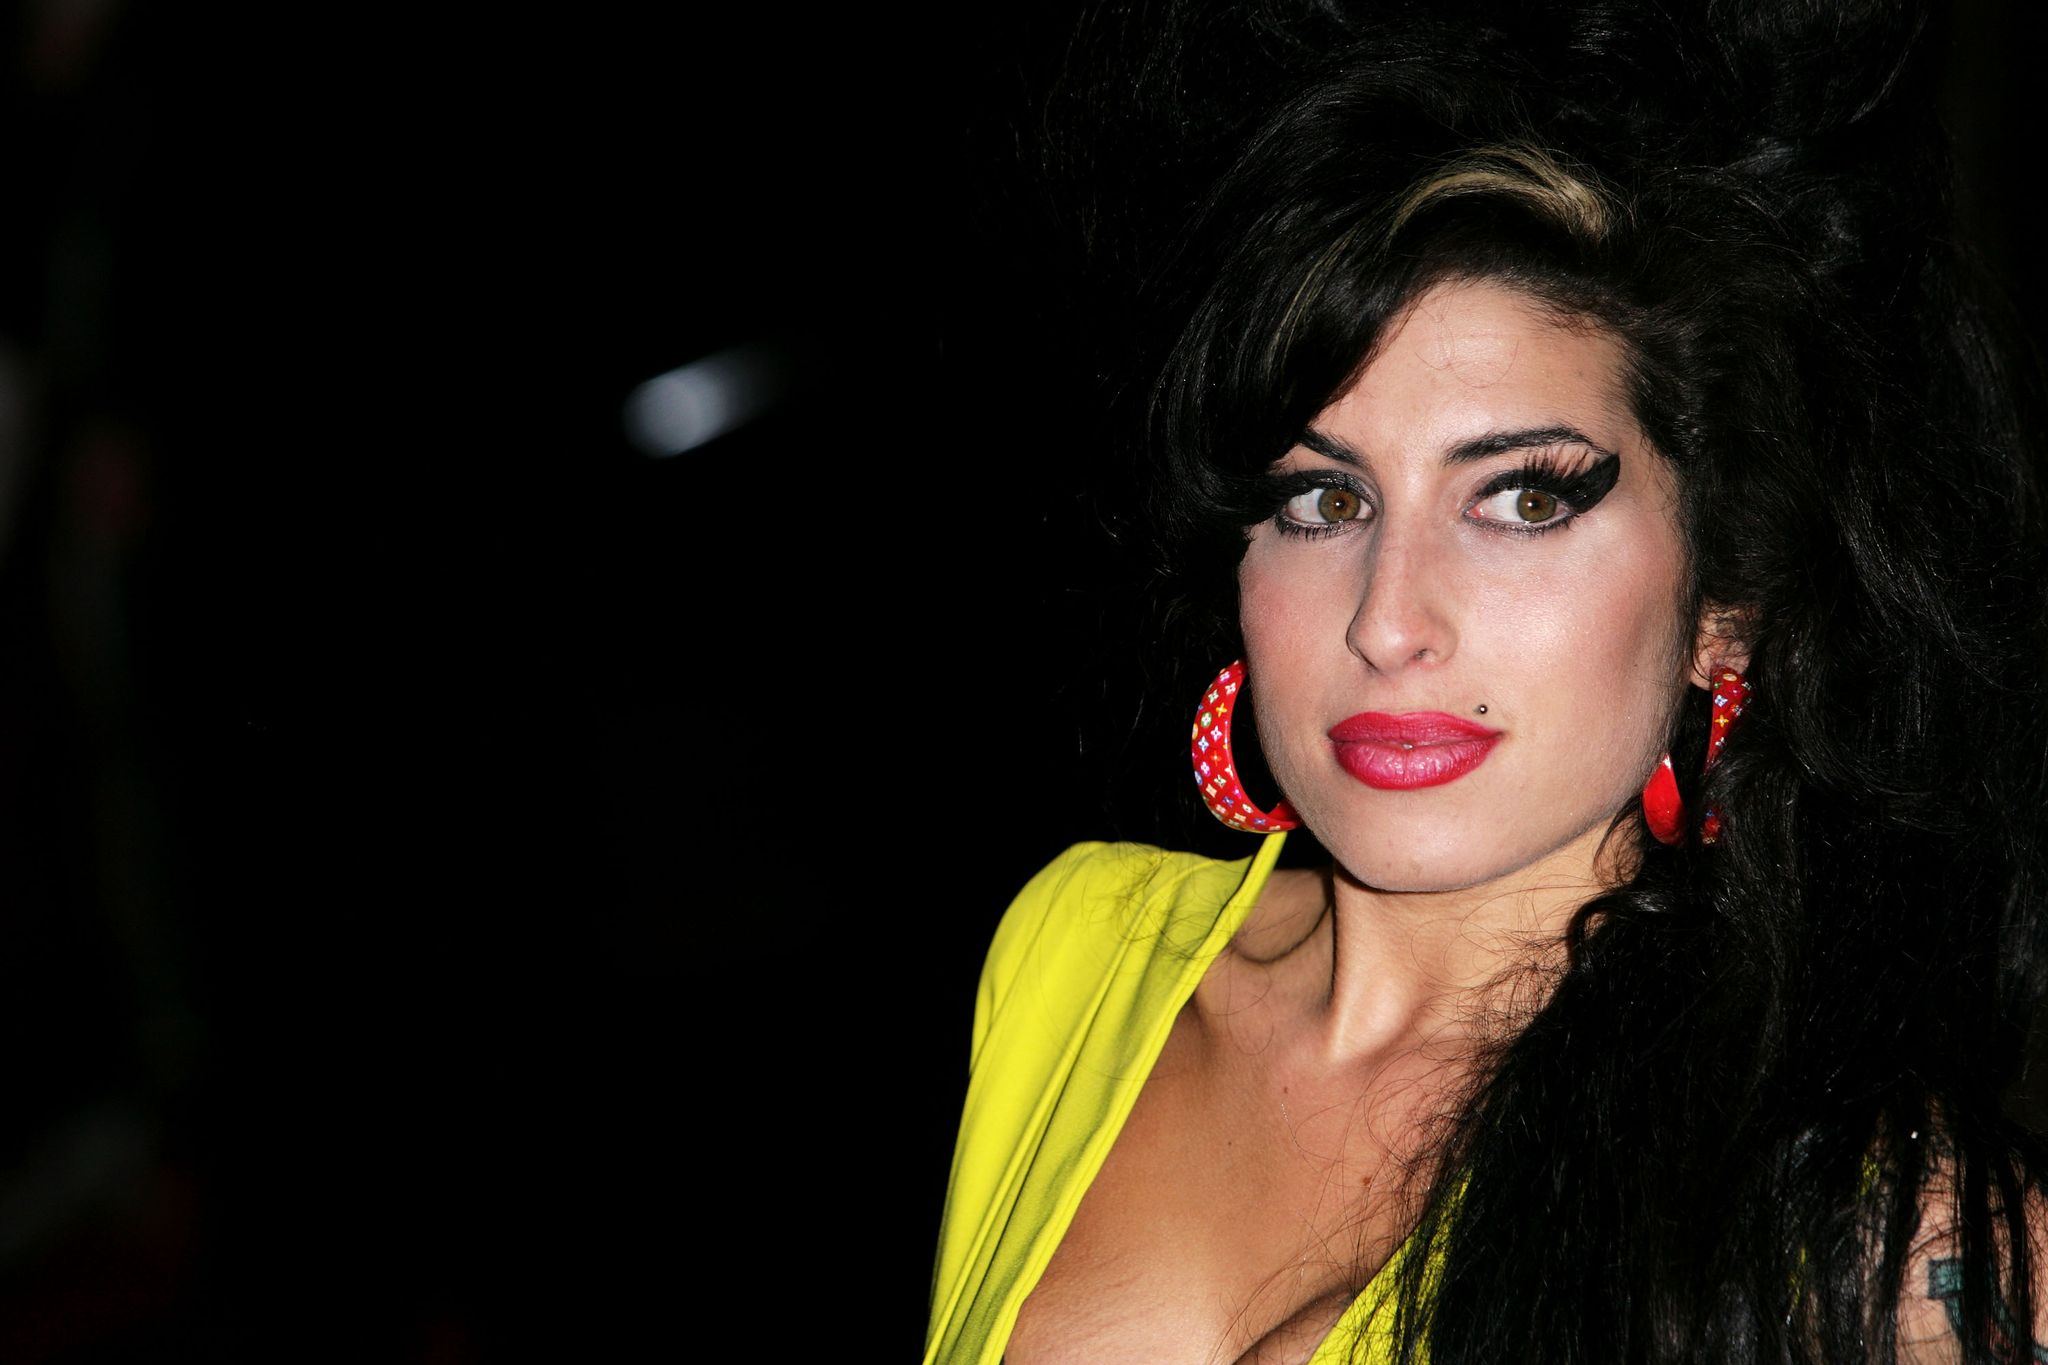 amy winehouse, who died of alcohol poisoning on july 23, 2011 at the age of 27